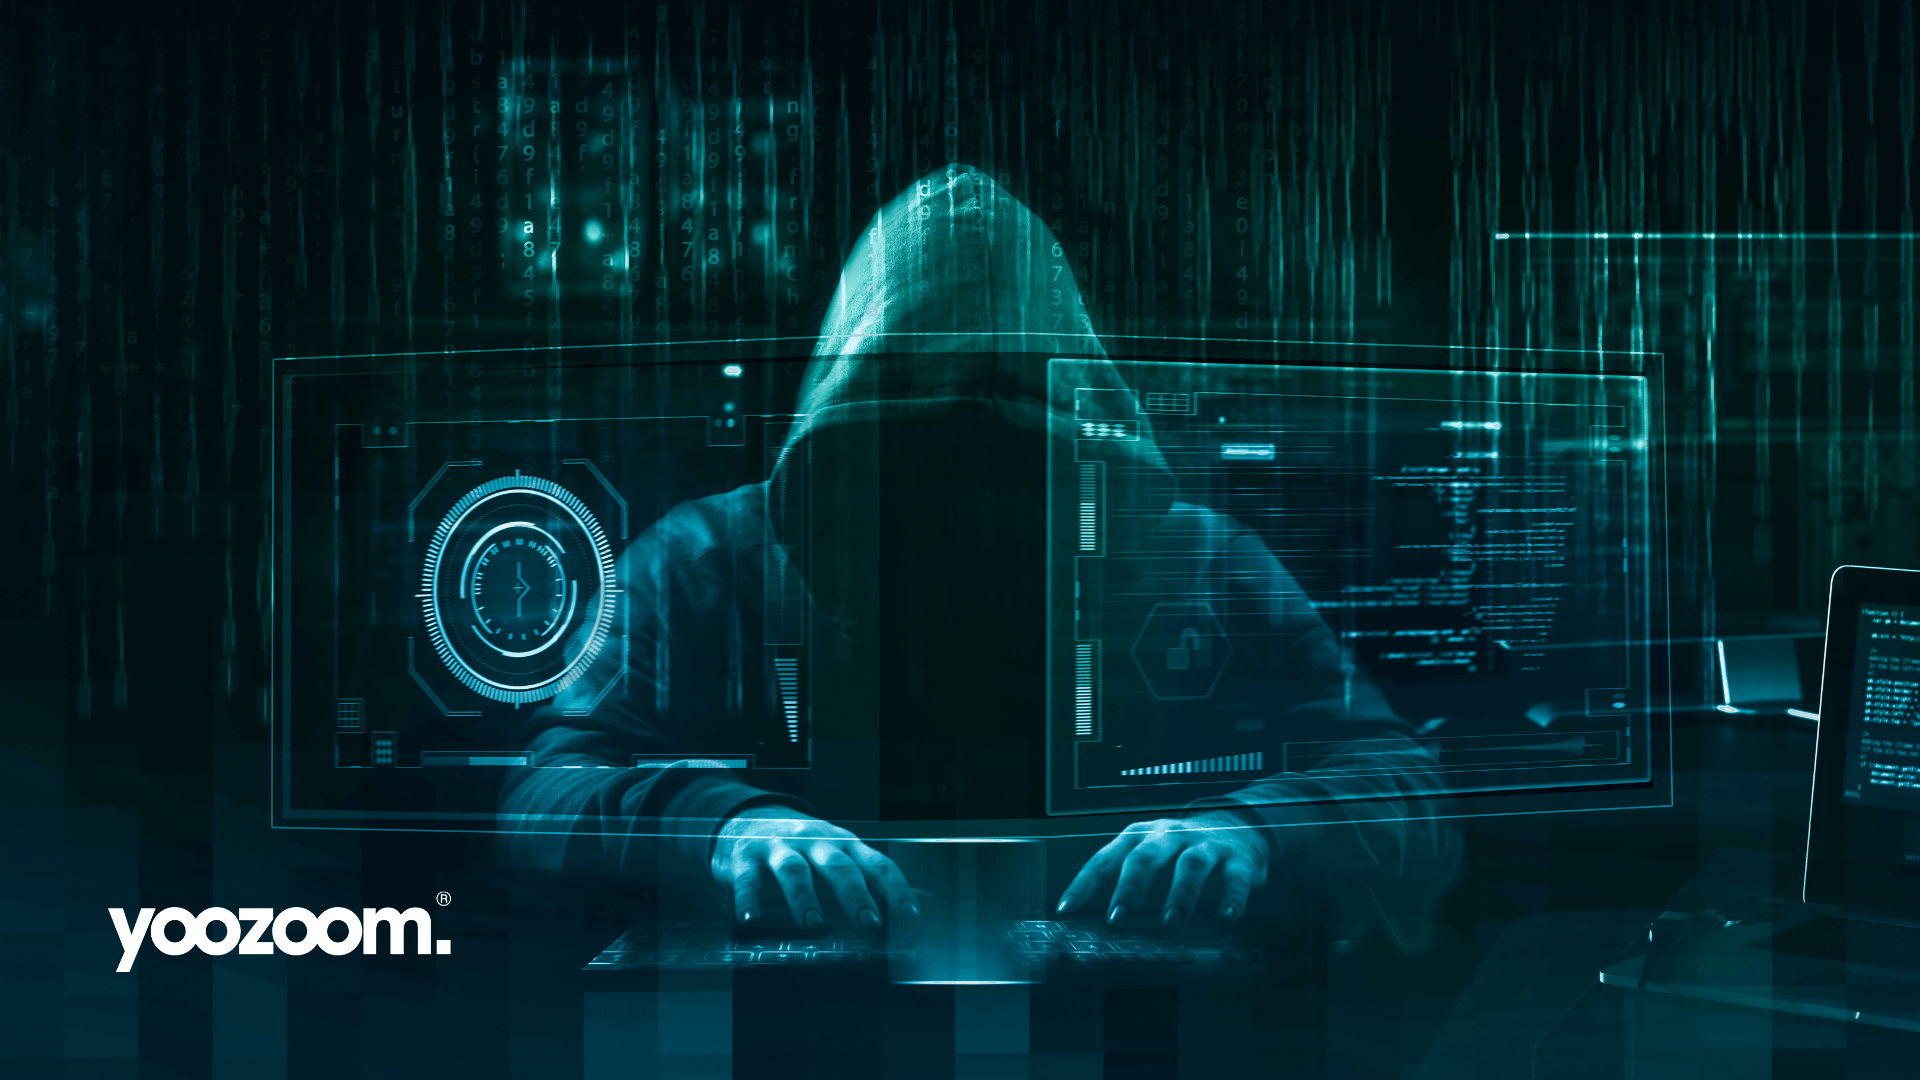 Phishing emails are the most common form of cybercrime. Learn how to protect yourself and your business with our four top cybersecurity tips.